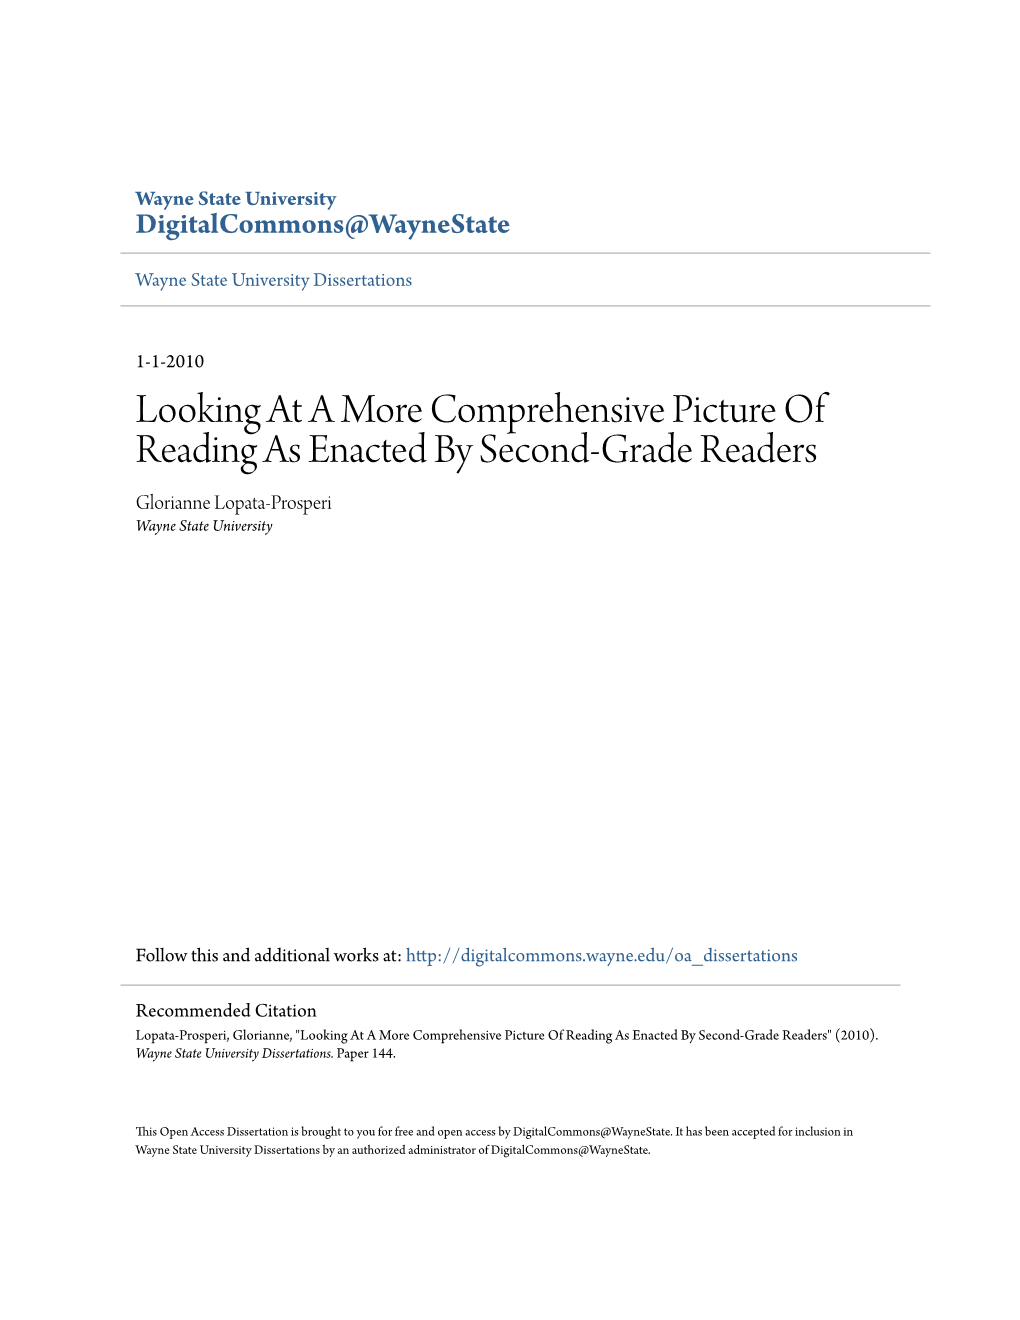 Looking at a More Comprehensive Picture of Reading As Enacted by Second-Grade Readers Glorianne Lopata-Prosperi Wayne State University